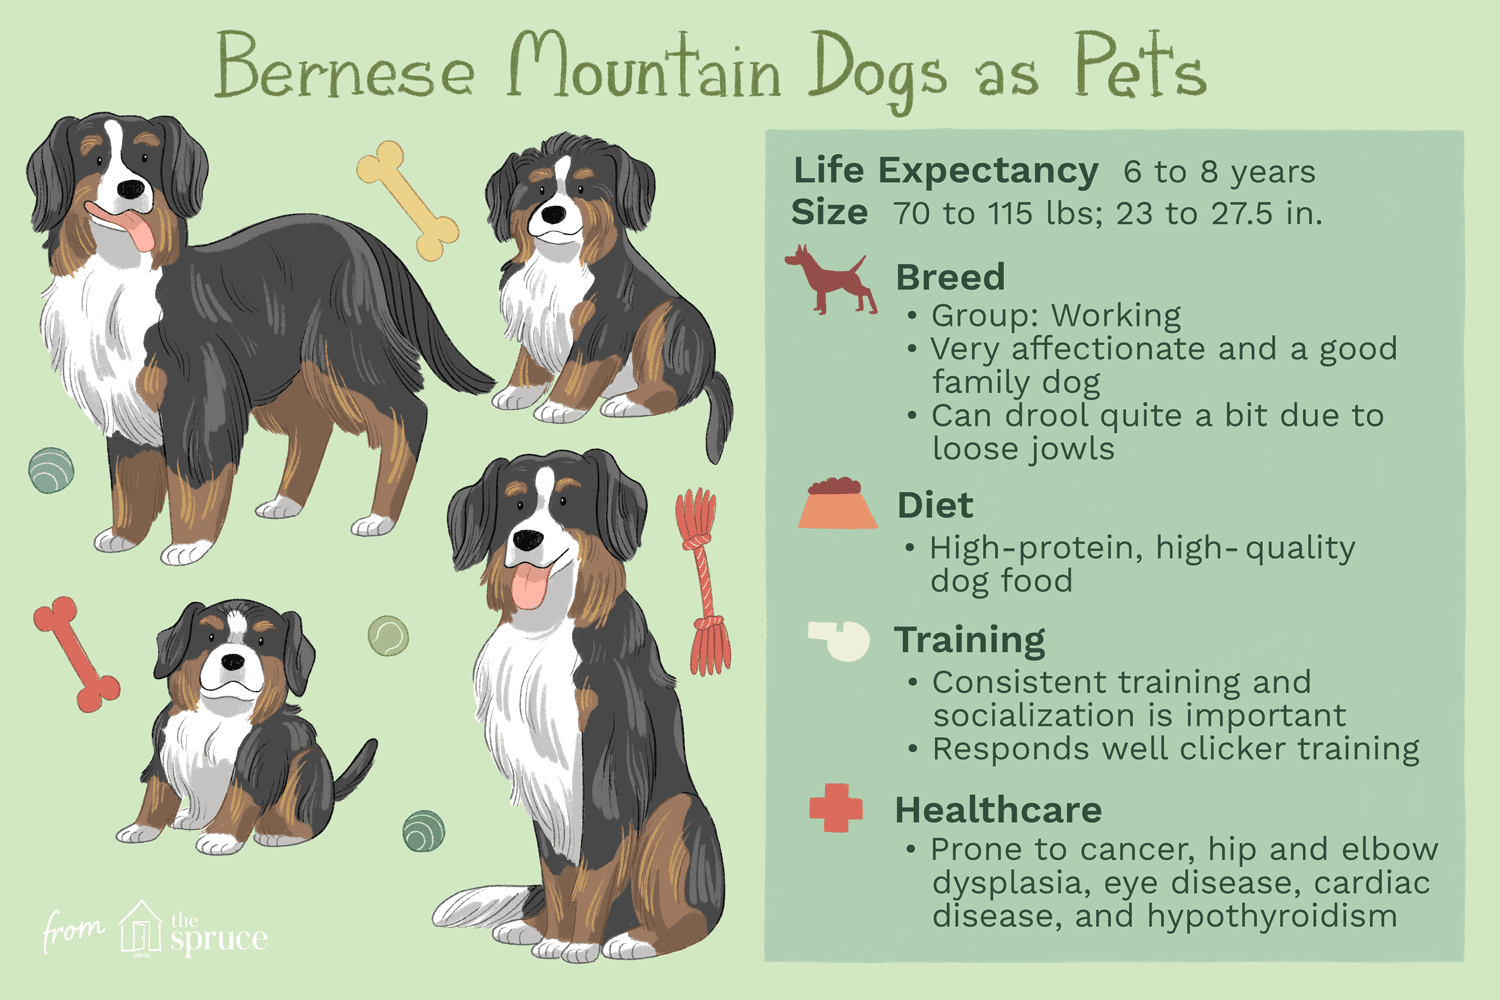 bernese mountain dogs as pets illustration